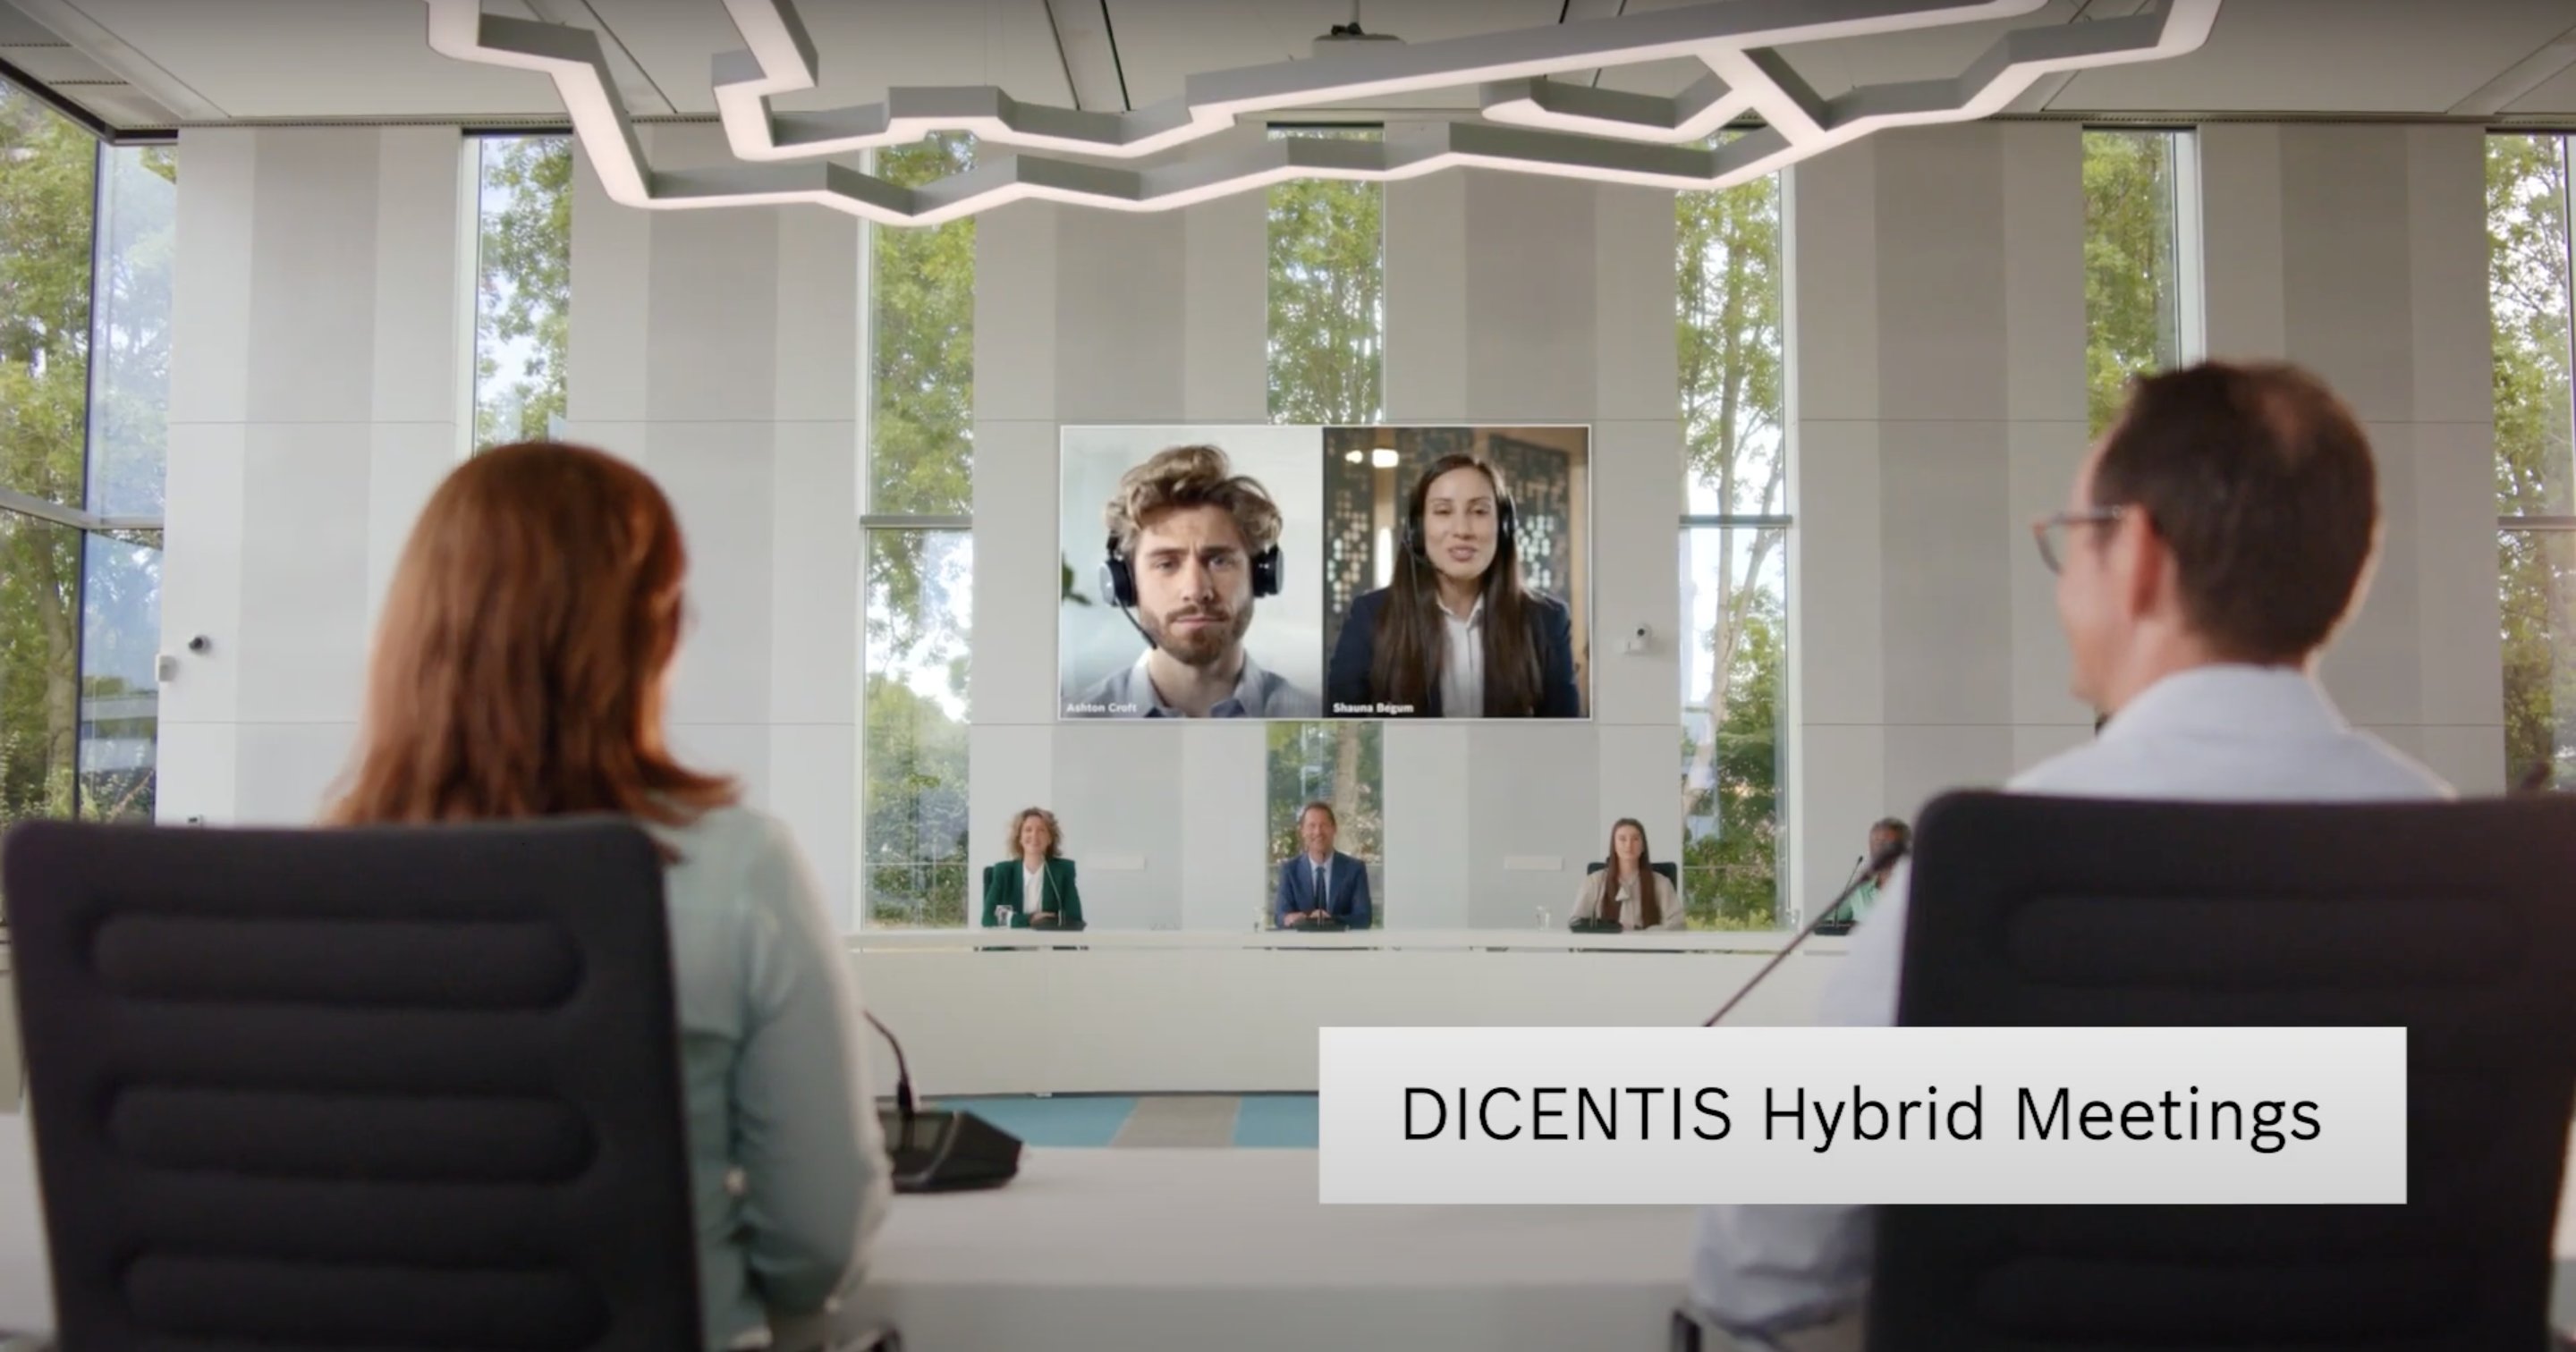 ProAVLCentral on X: "DICENTIS Hybrid Meetings from Bosch is a complete  end-to-end solution that ticks all the boxes for highly efficient, legally  compliant meetings. Watch the video here - https://t.co/EtLXNoUvK1  #BoschAlwaysAhead #DICENTISHybridMeetings #